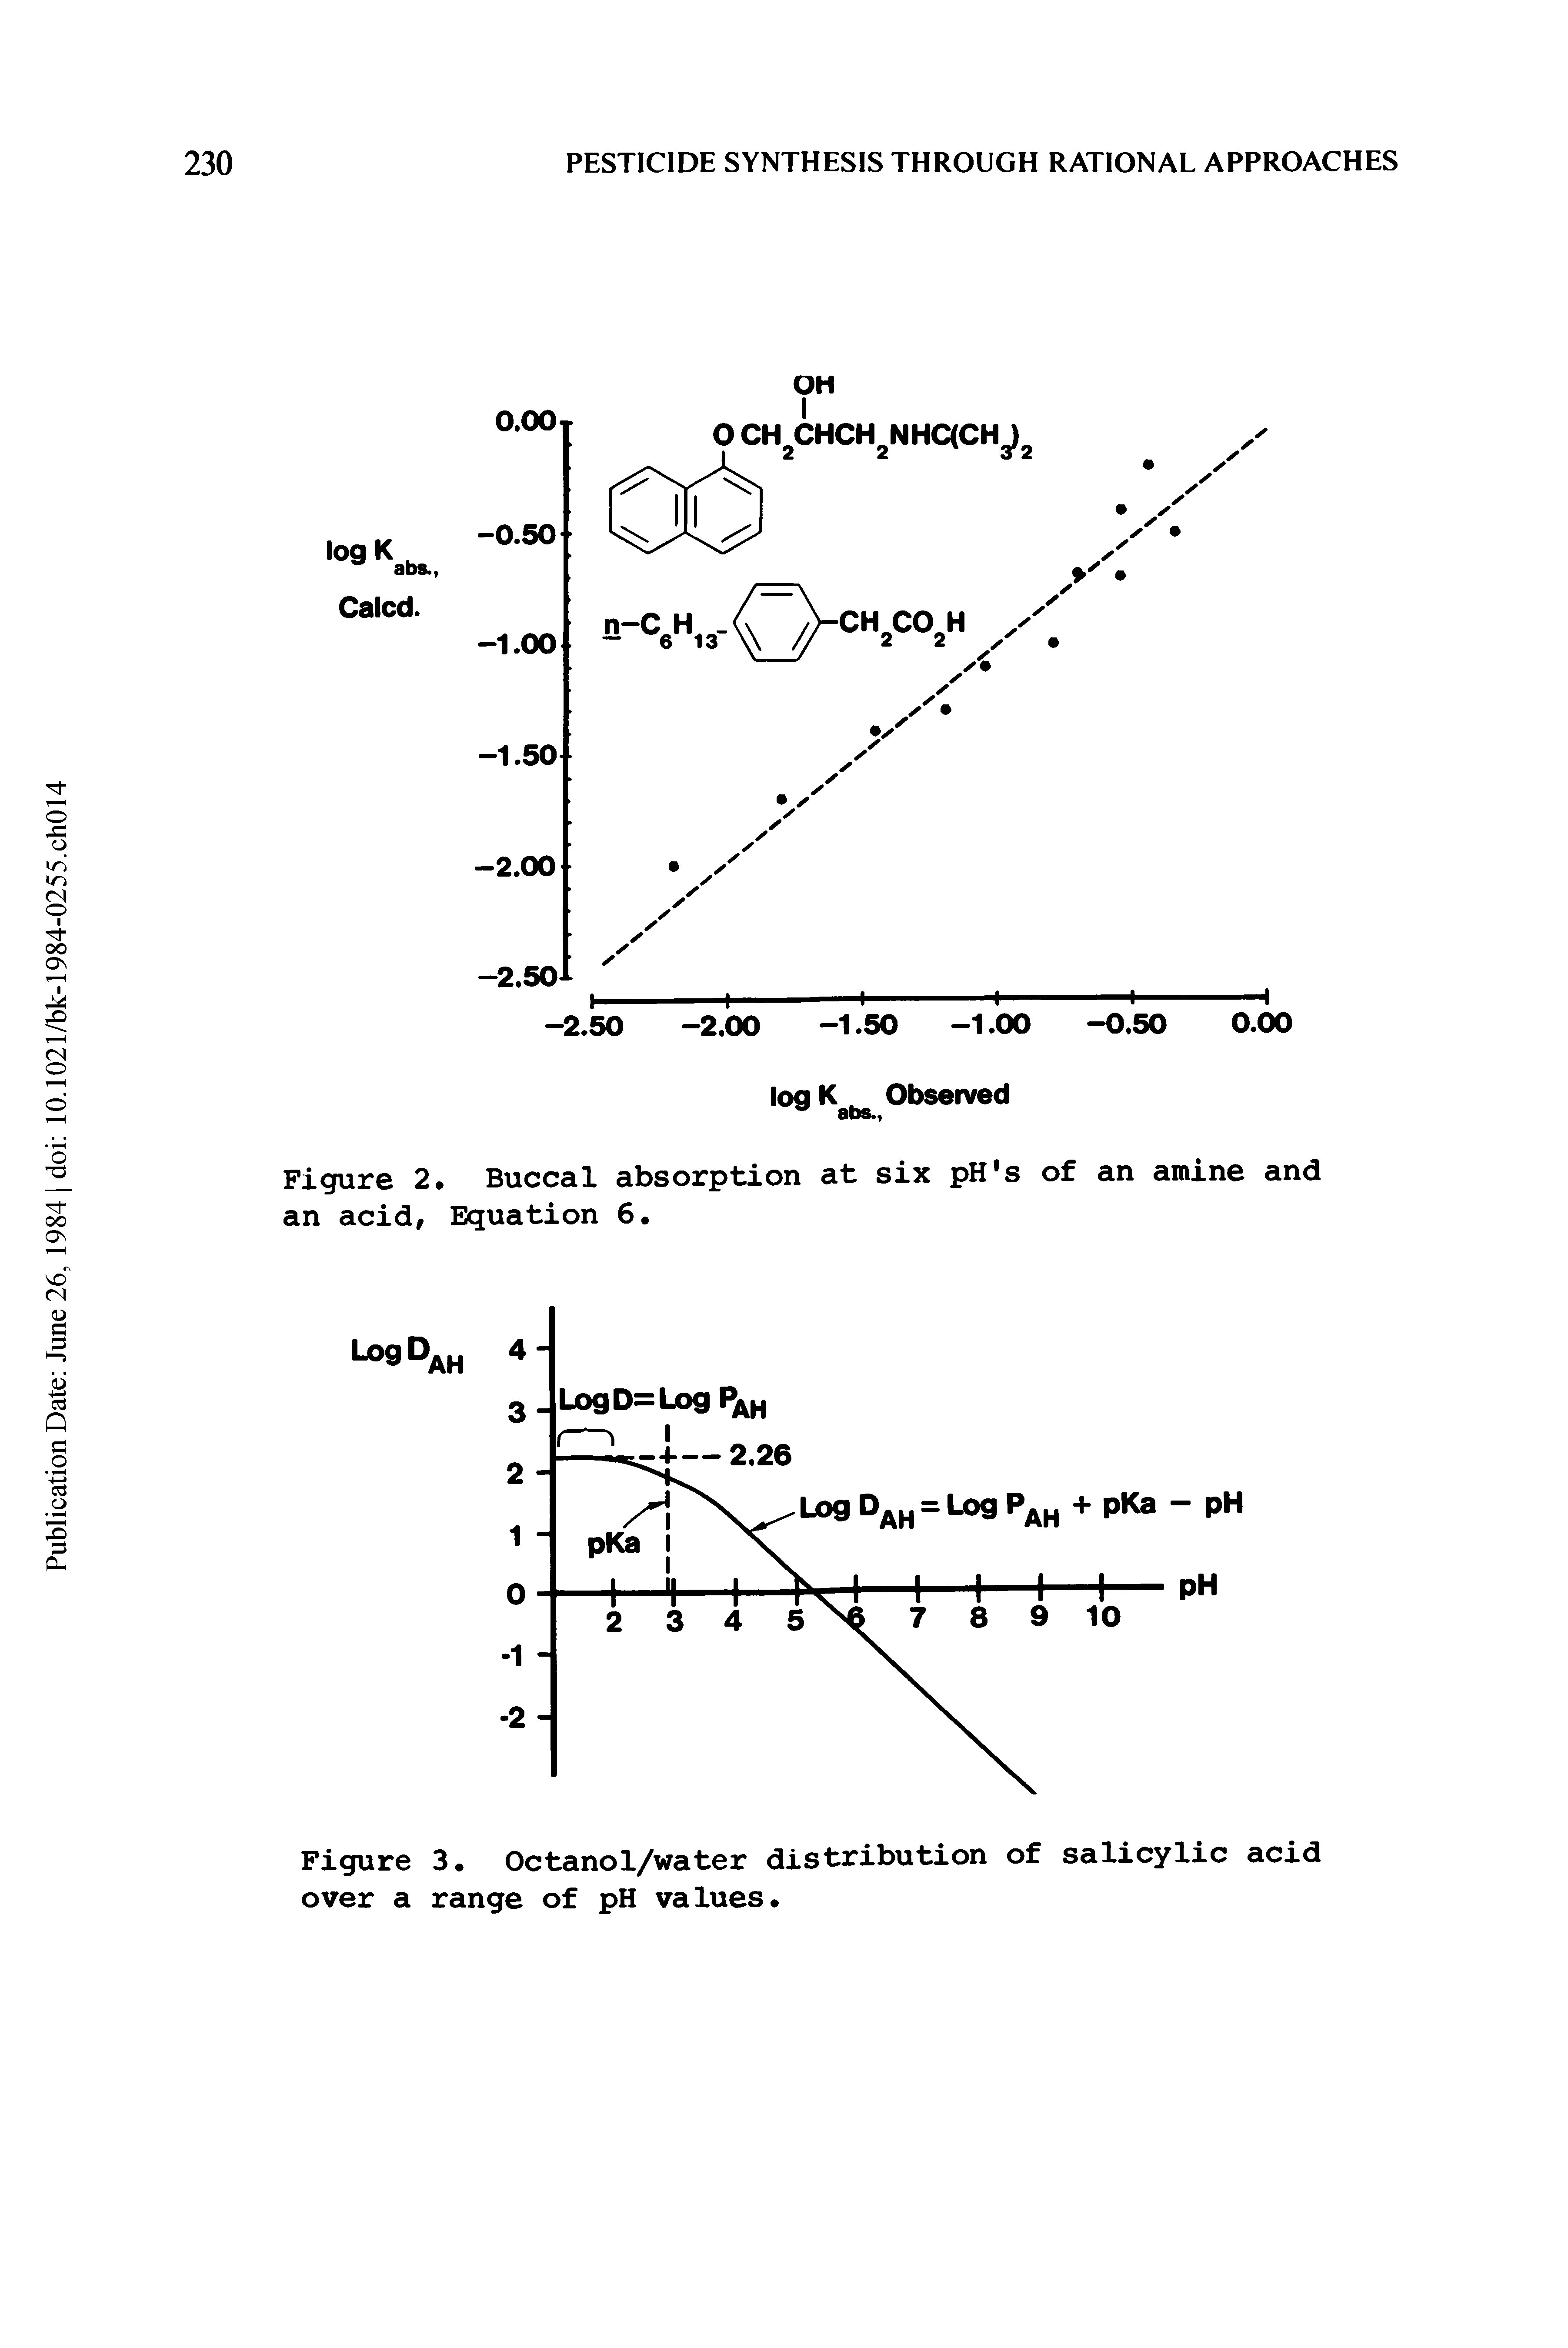 Figure 2. Buccal absorption at six pH s of an amine and an acid. Equation 6.